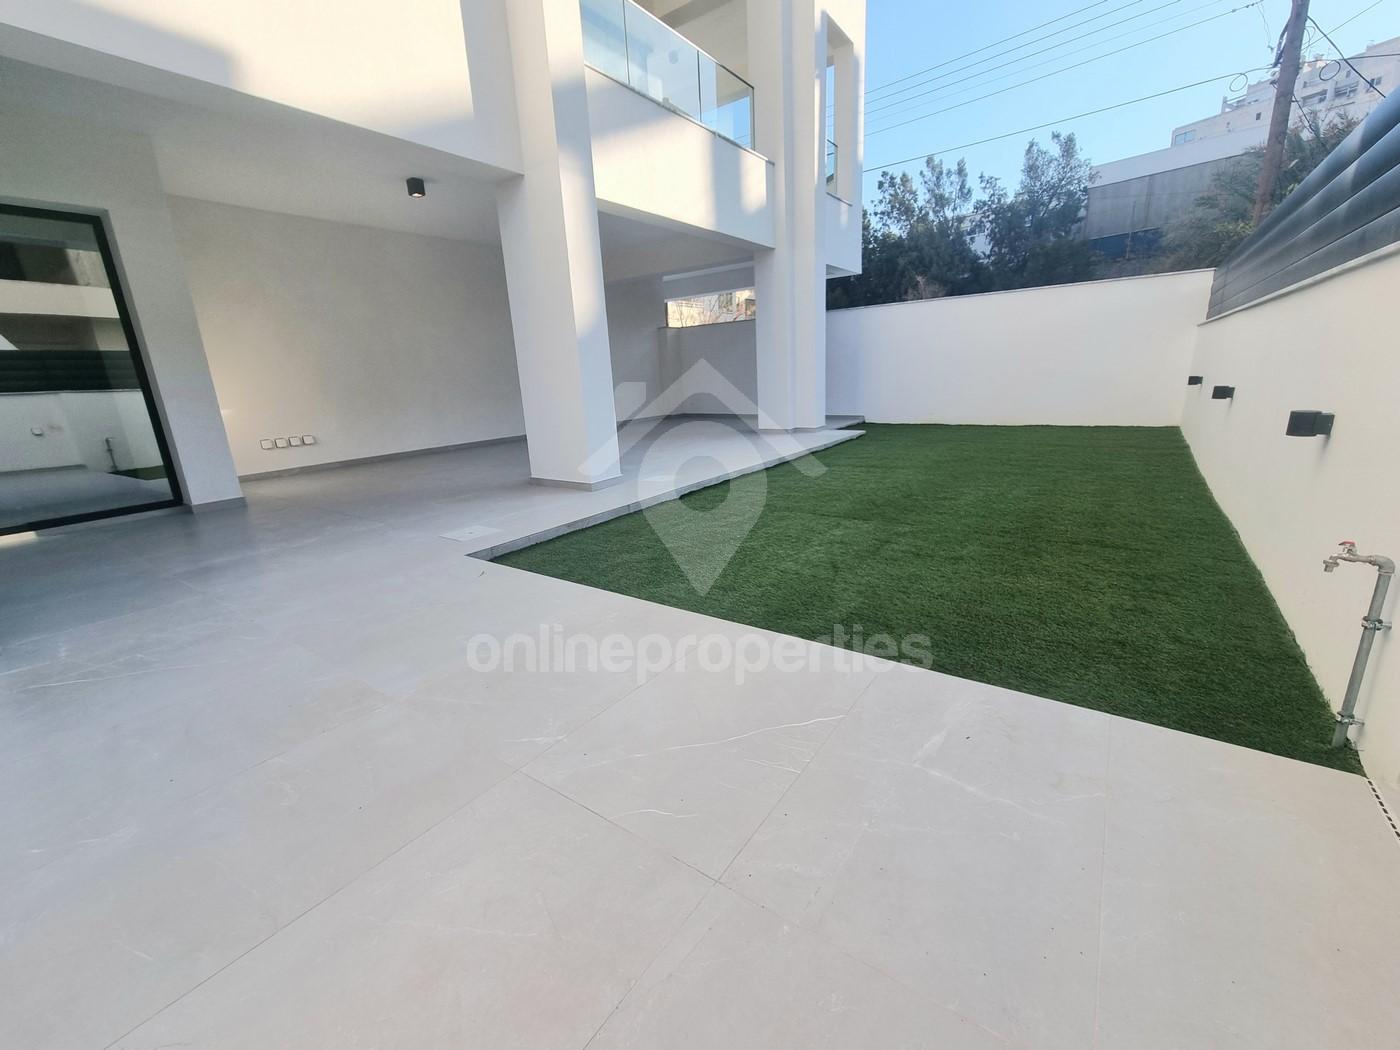 Brand New Ground Floor 2 Bed with 100sq.m garden near the city center